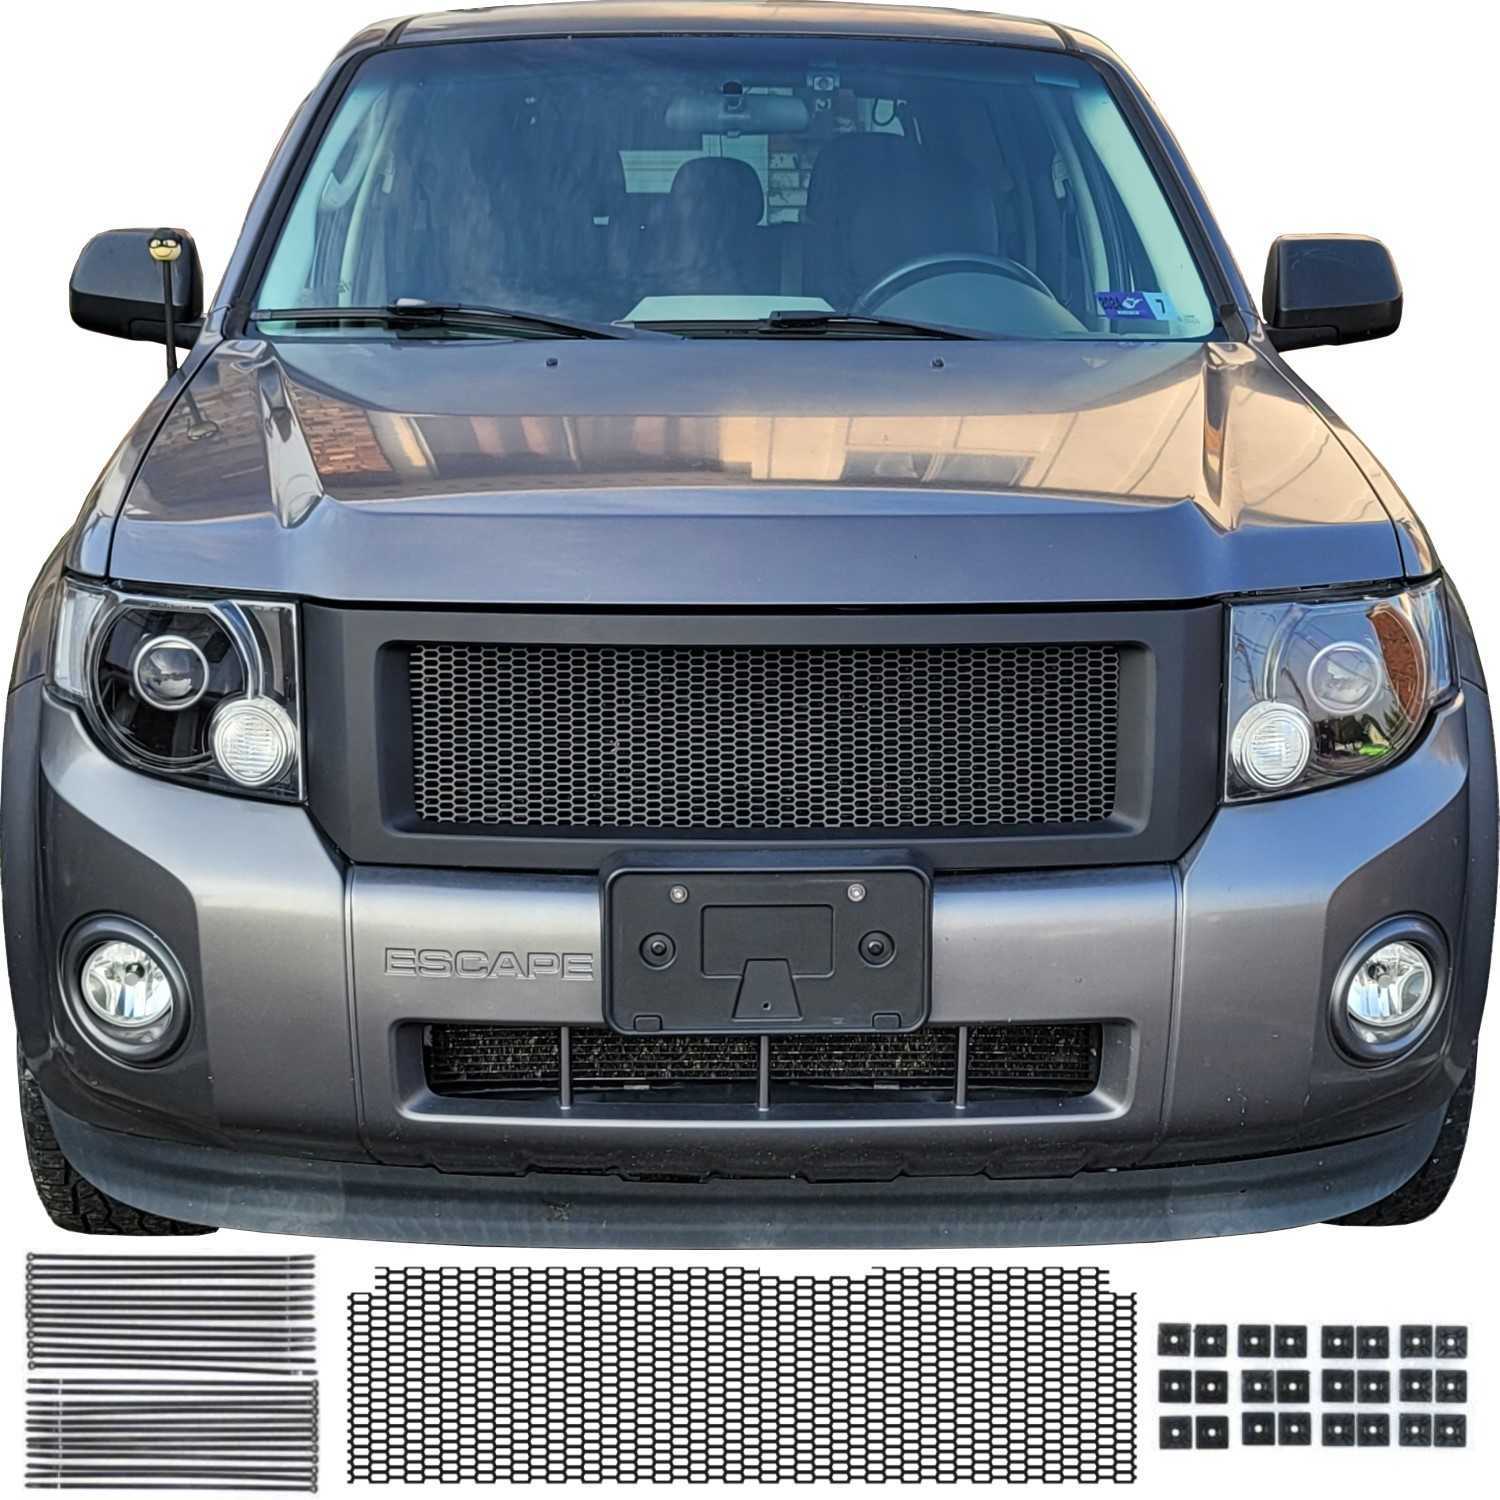 2008 - 2012 Ford Escape Mesh Grill Kit